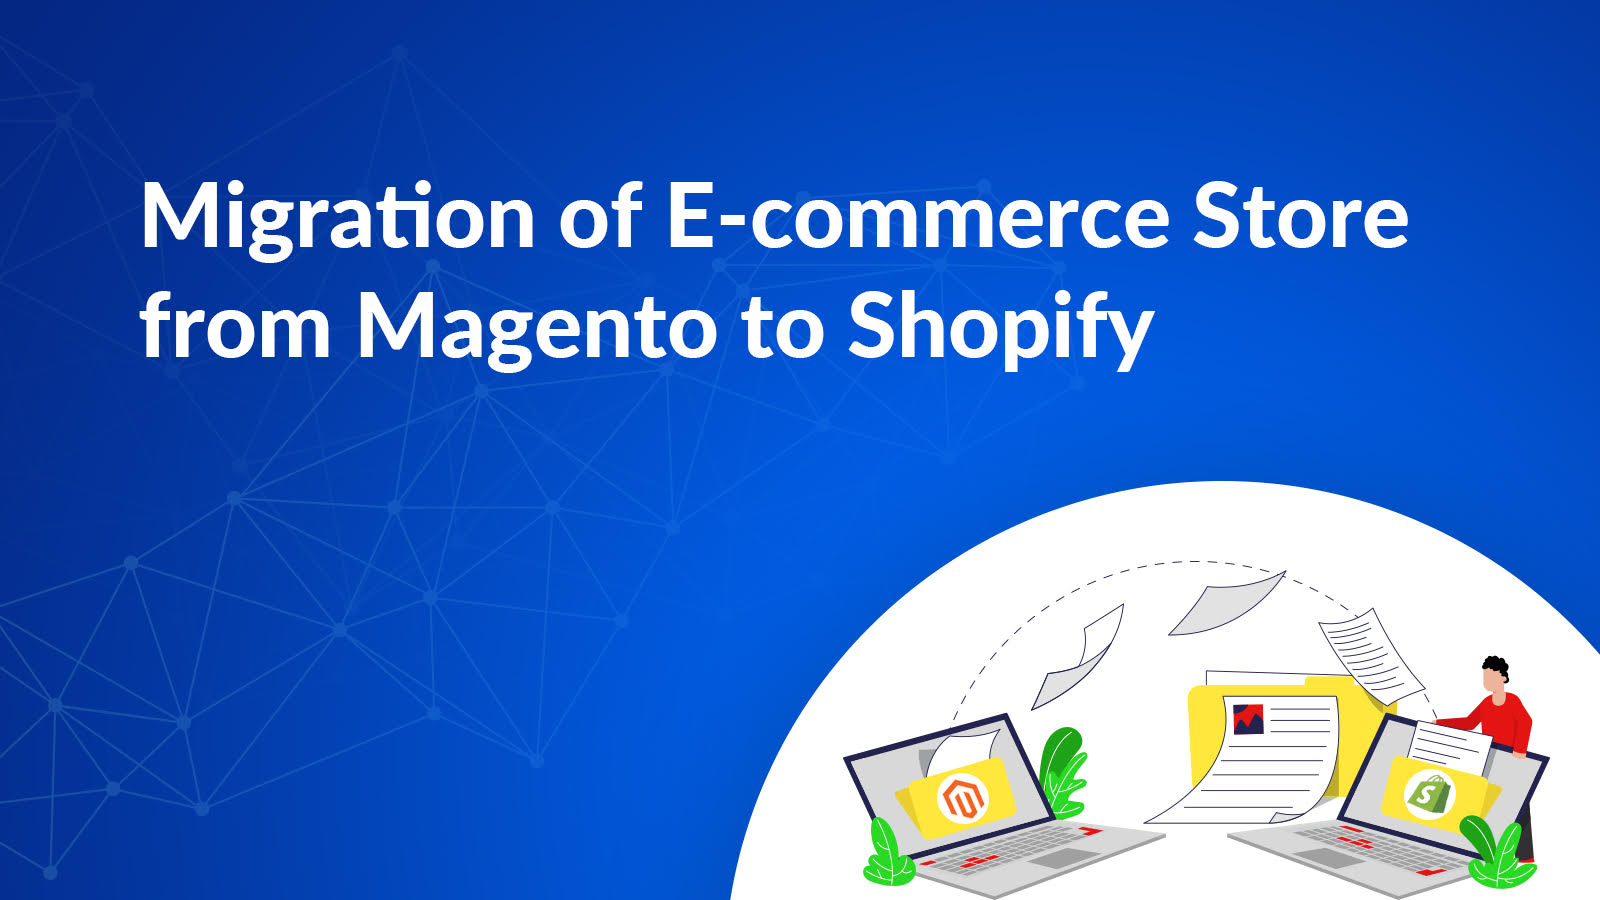 Migrate from Magento to Shopify